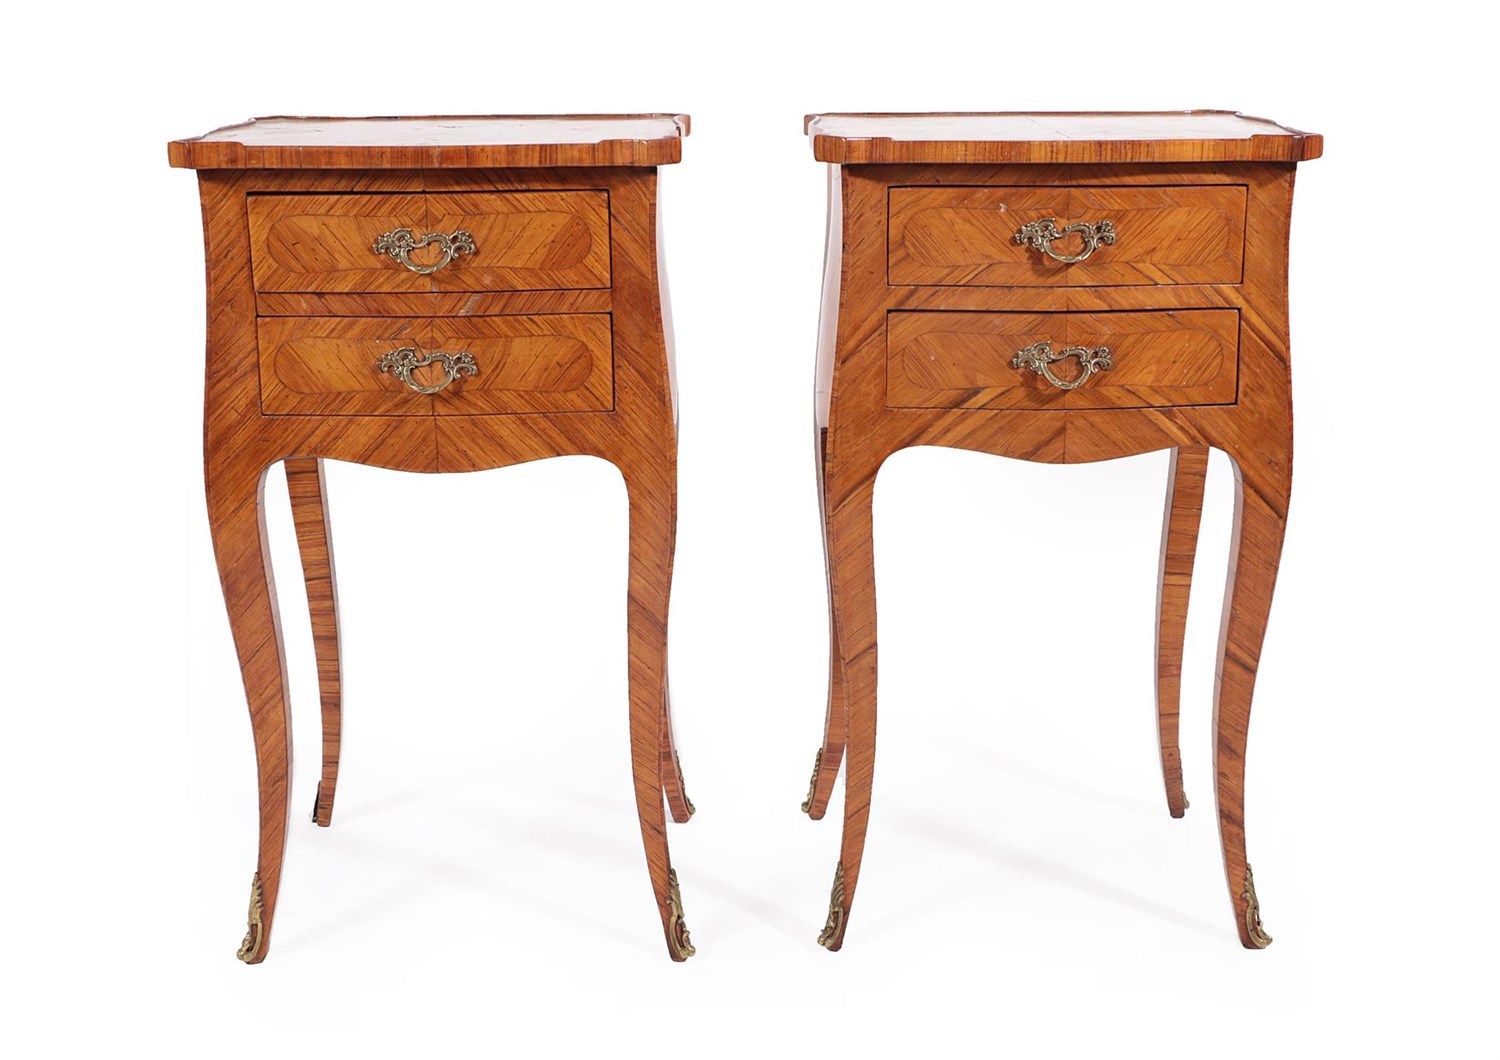 Lot 365 - A Pair of French 19th Century Tulipwood Petit Commodes, possibly North Italian, the shaped...